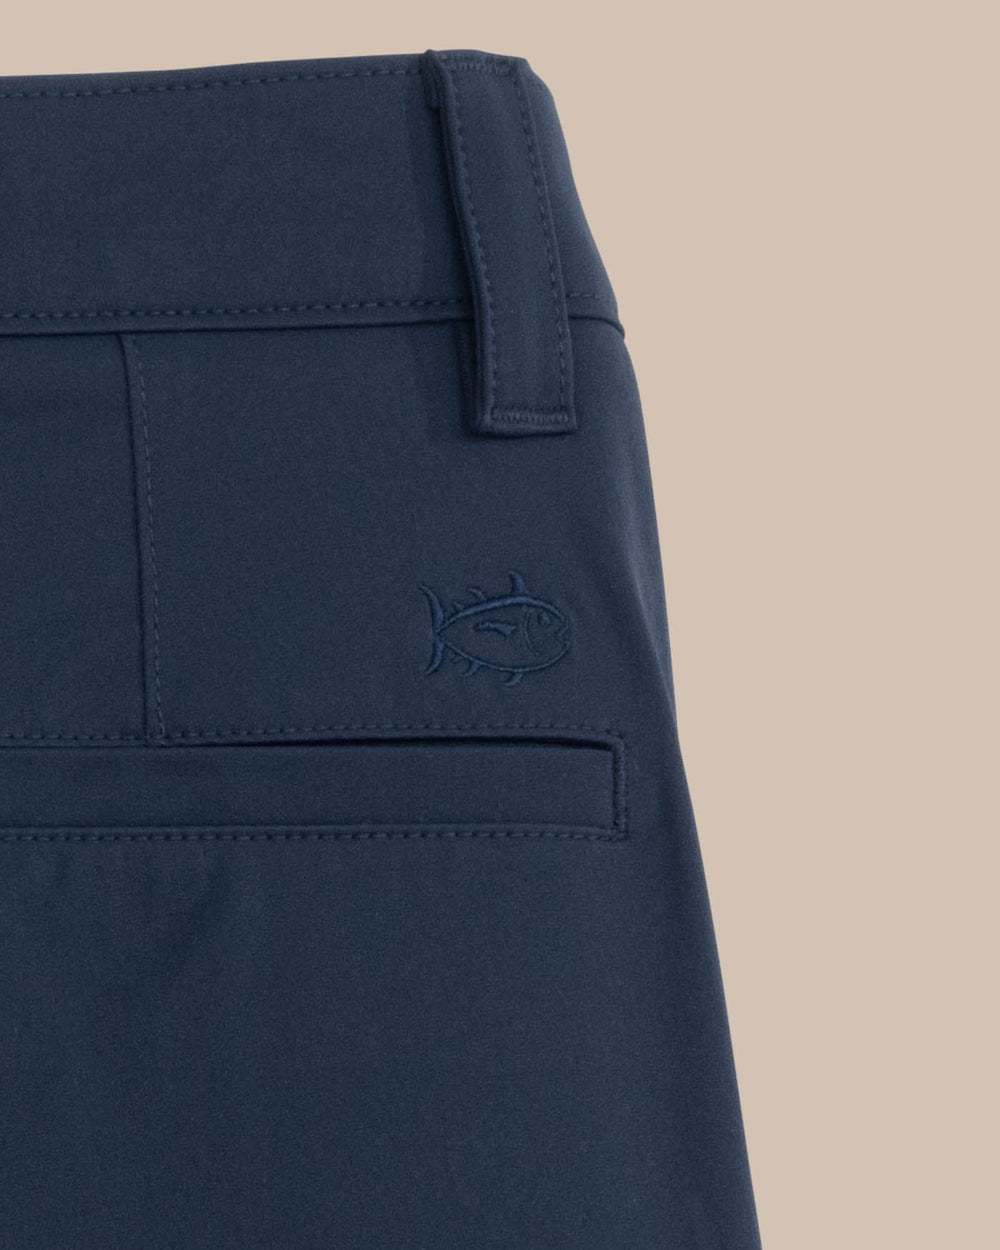 The detail view of the Southern Tide brrr die 10 Short by Southern Tide - True Navy